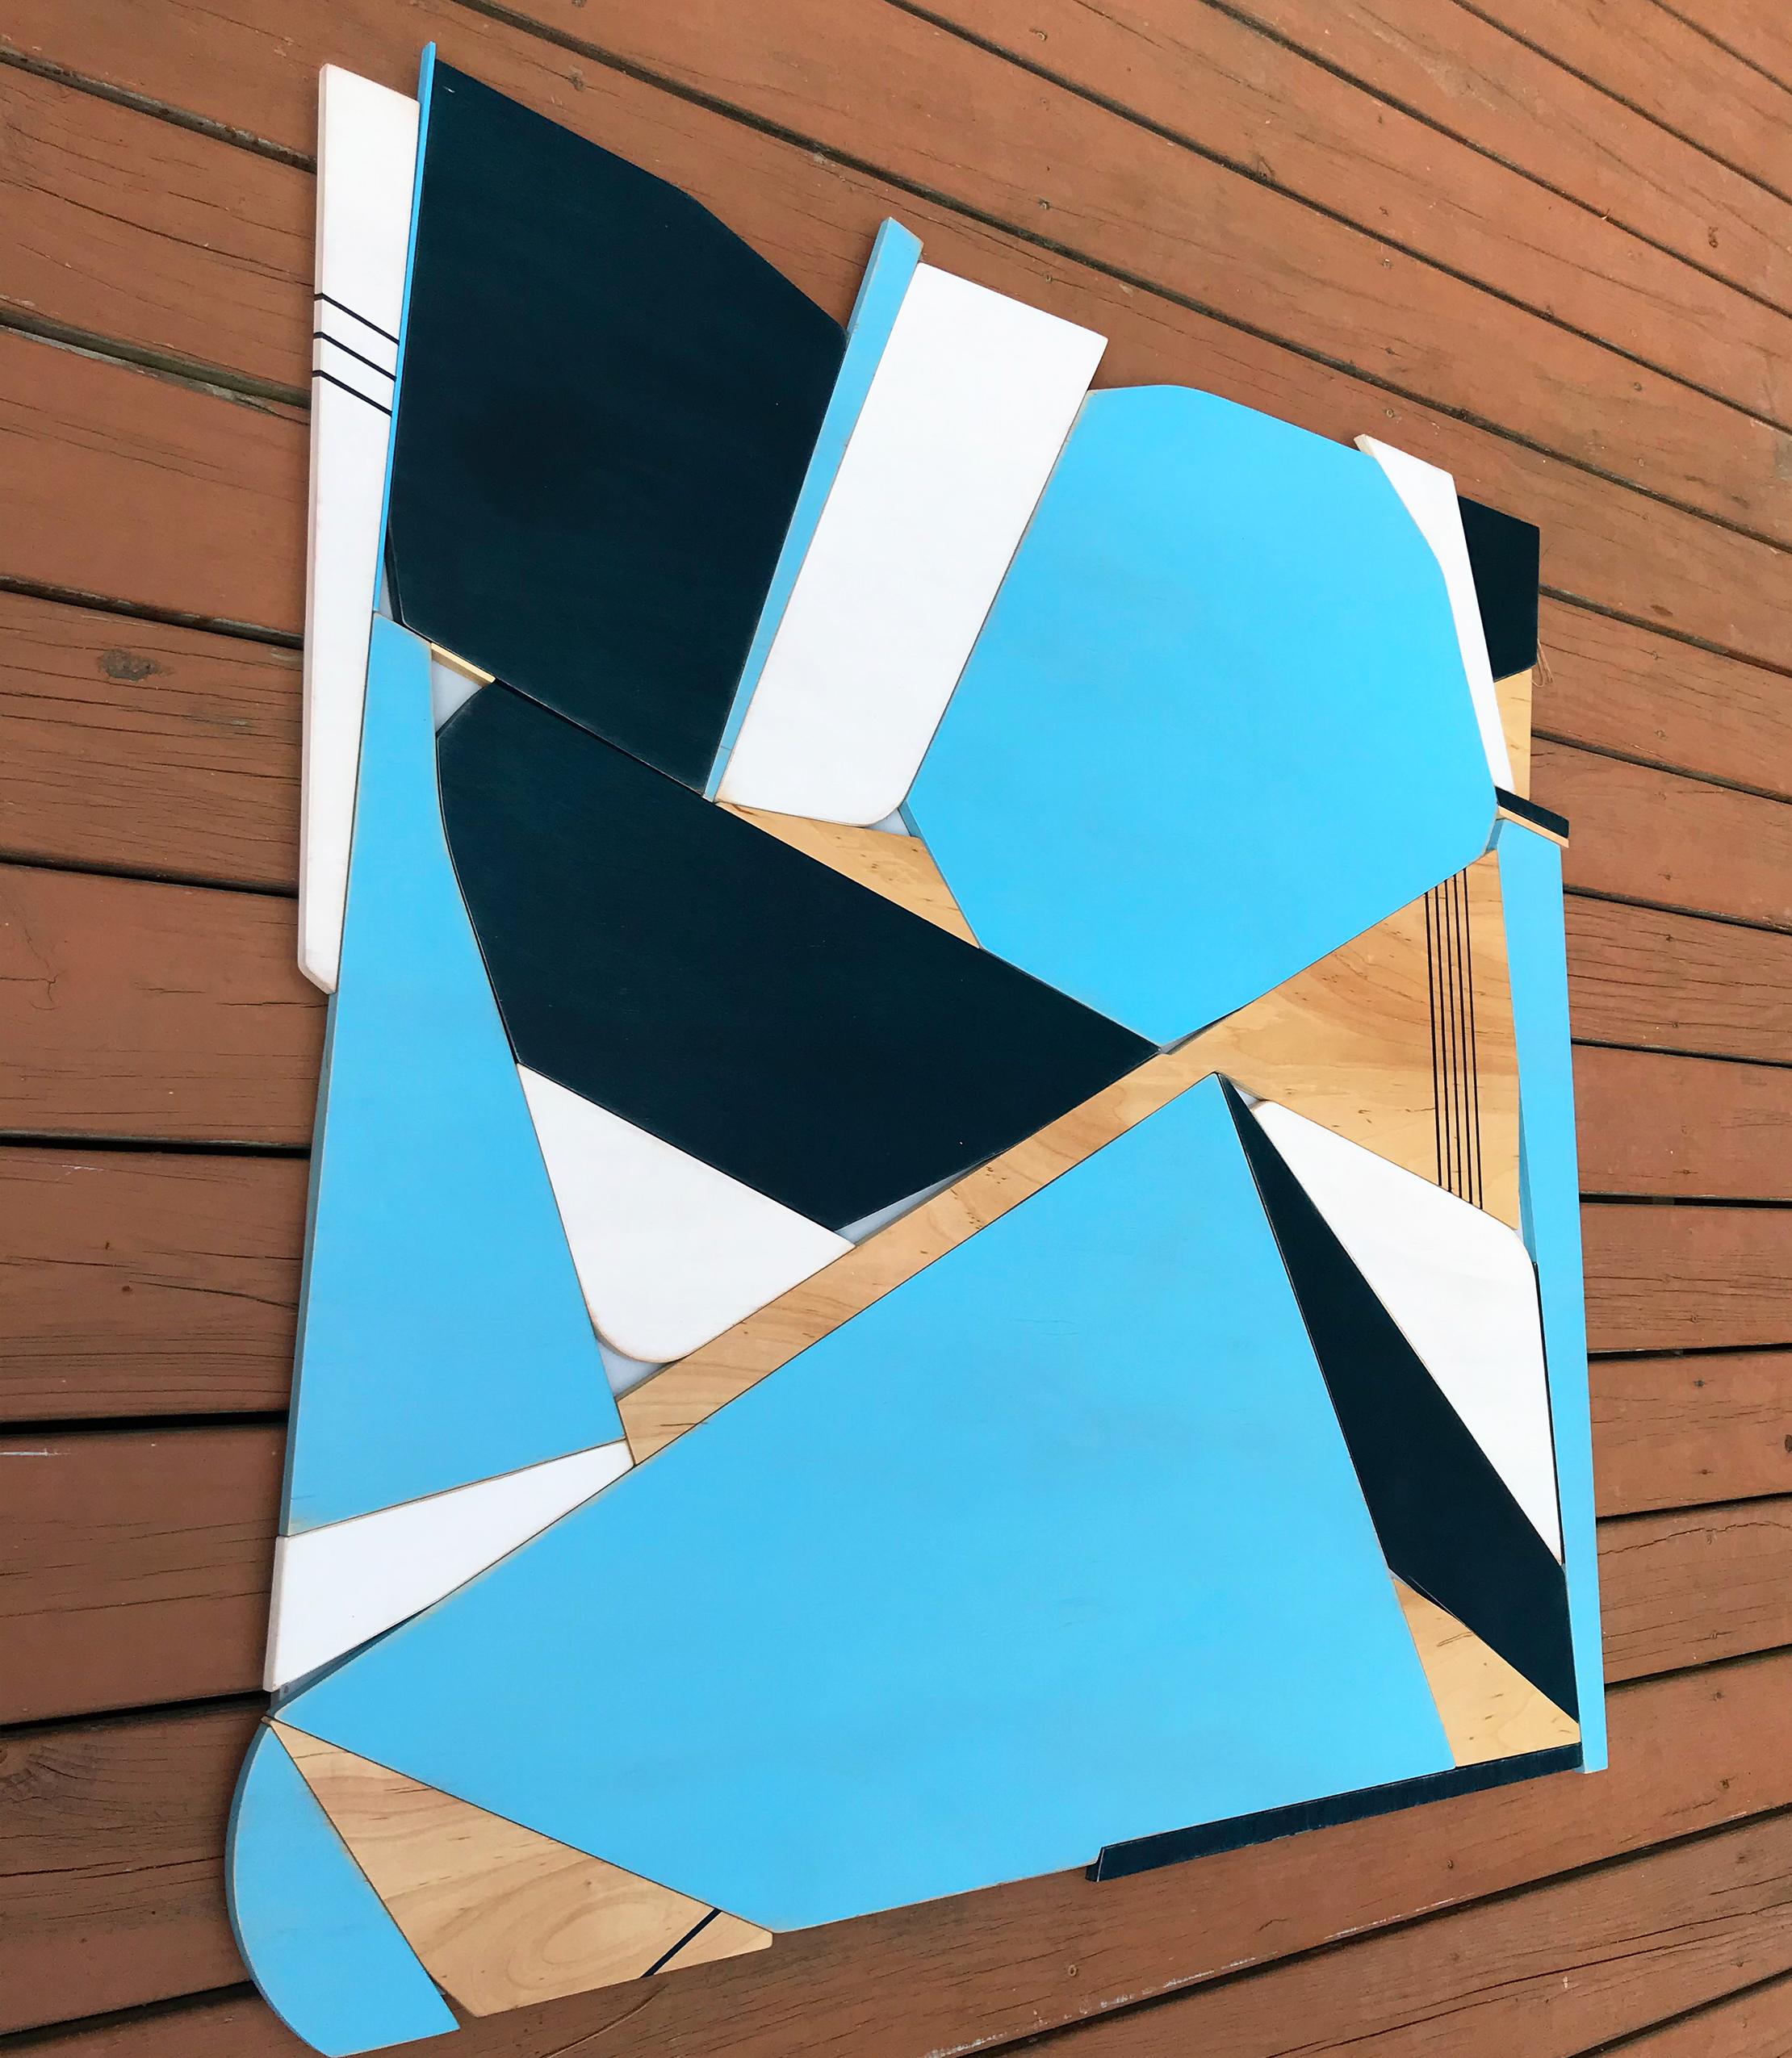 *Please message Stella Ripley here for any inquiries or commission request.

BlueBird is an elegant modern and minimalist contemporary wall sculpture. It is
constructed with birch panels, acrylic and latex washes with a satin lacquer clear